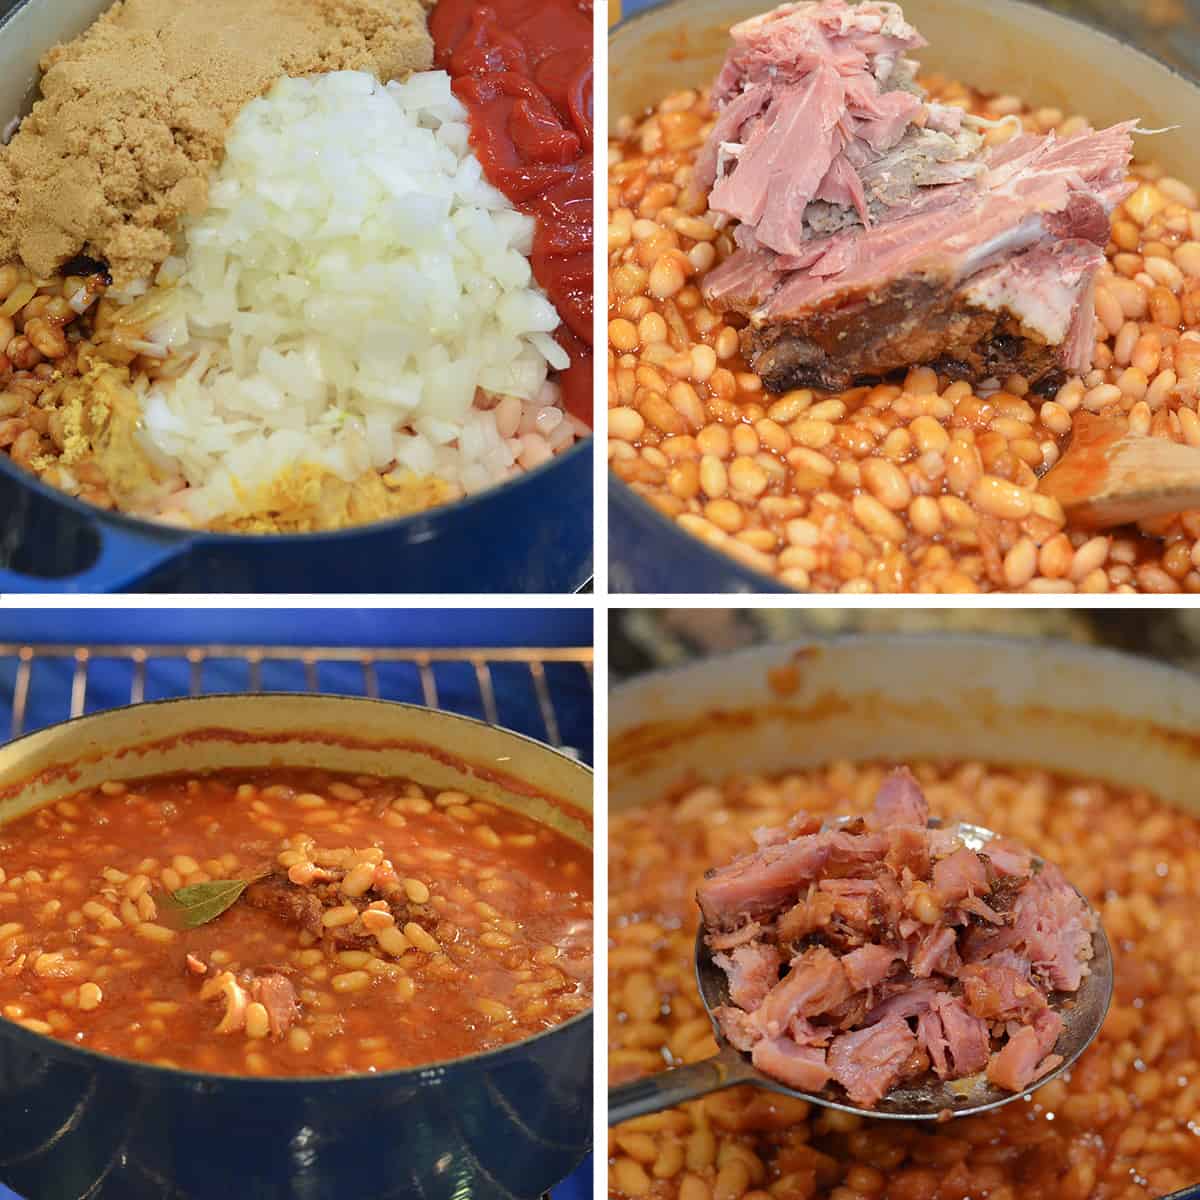 Four images showing baked bean ingredients in a pot before and after cooking and pieces of ham being added to the beans.